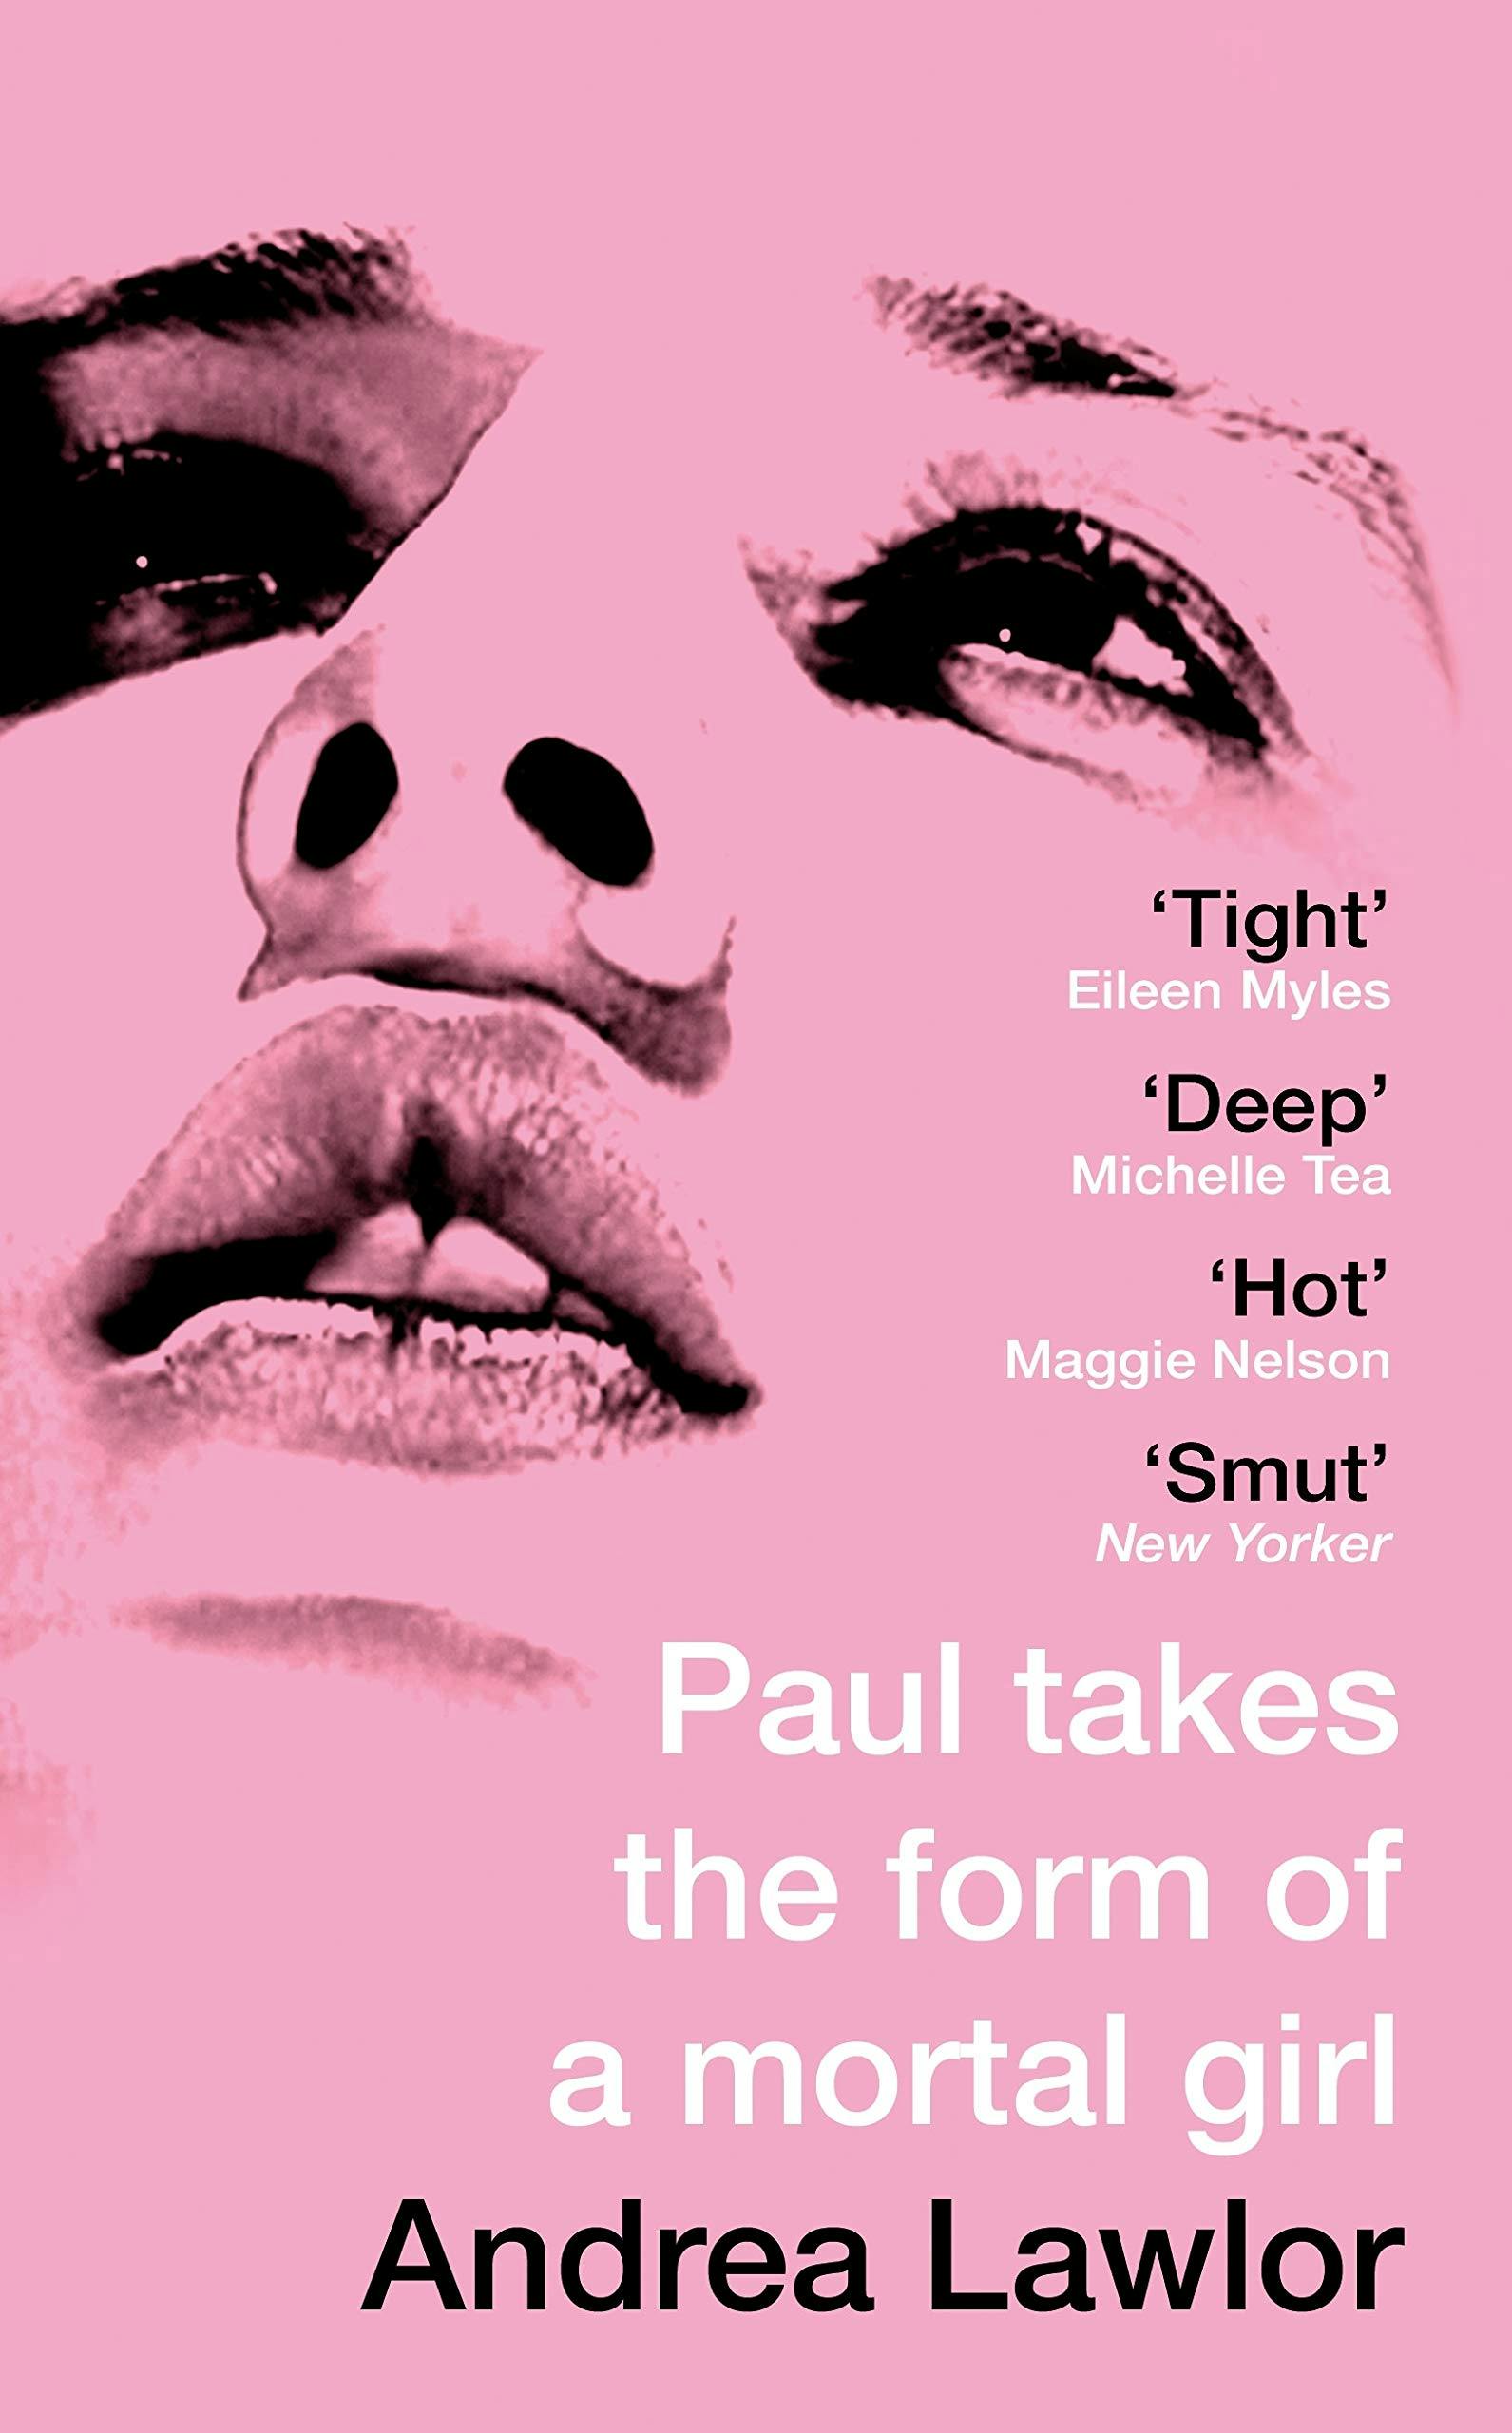 A cover of a book titled "Paul Takes the Form of a Mortal Girl" by Andrea Lawlor. It is pink and shows a face of a person. 